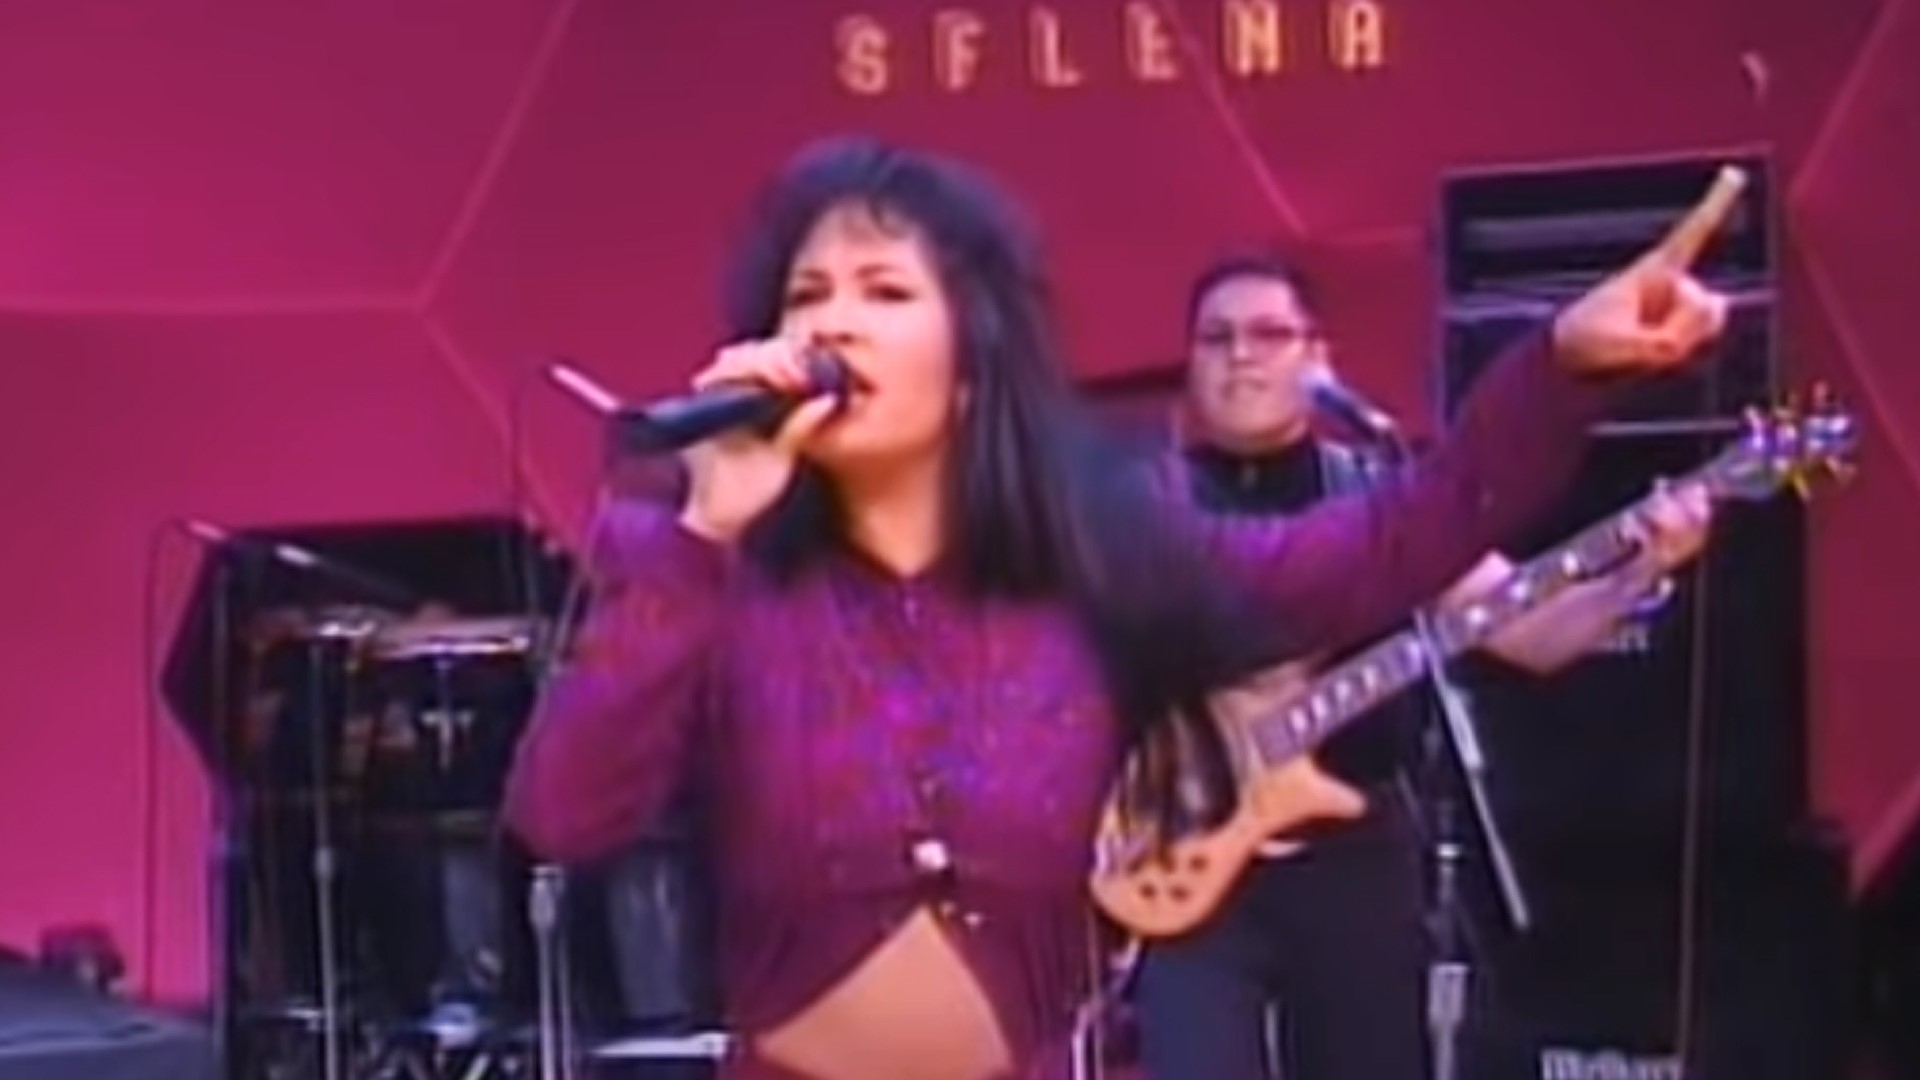 It was 24 years ago today, Feb. 26, 1995, when Selena Quintanilla-Pérez performed her last televised concert.